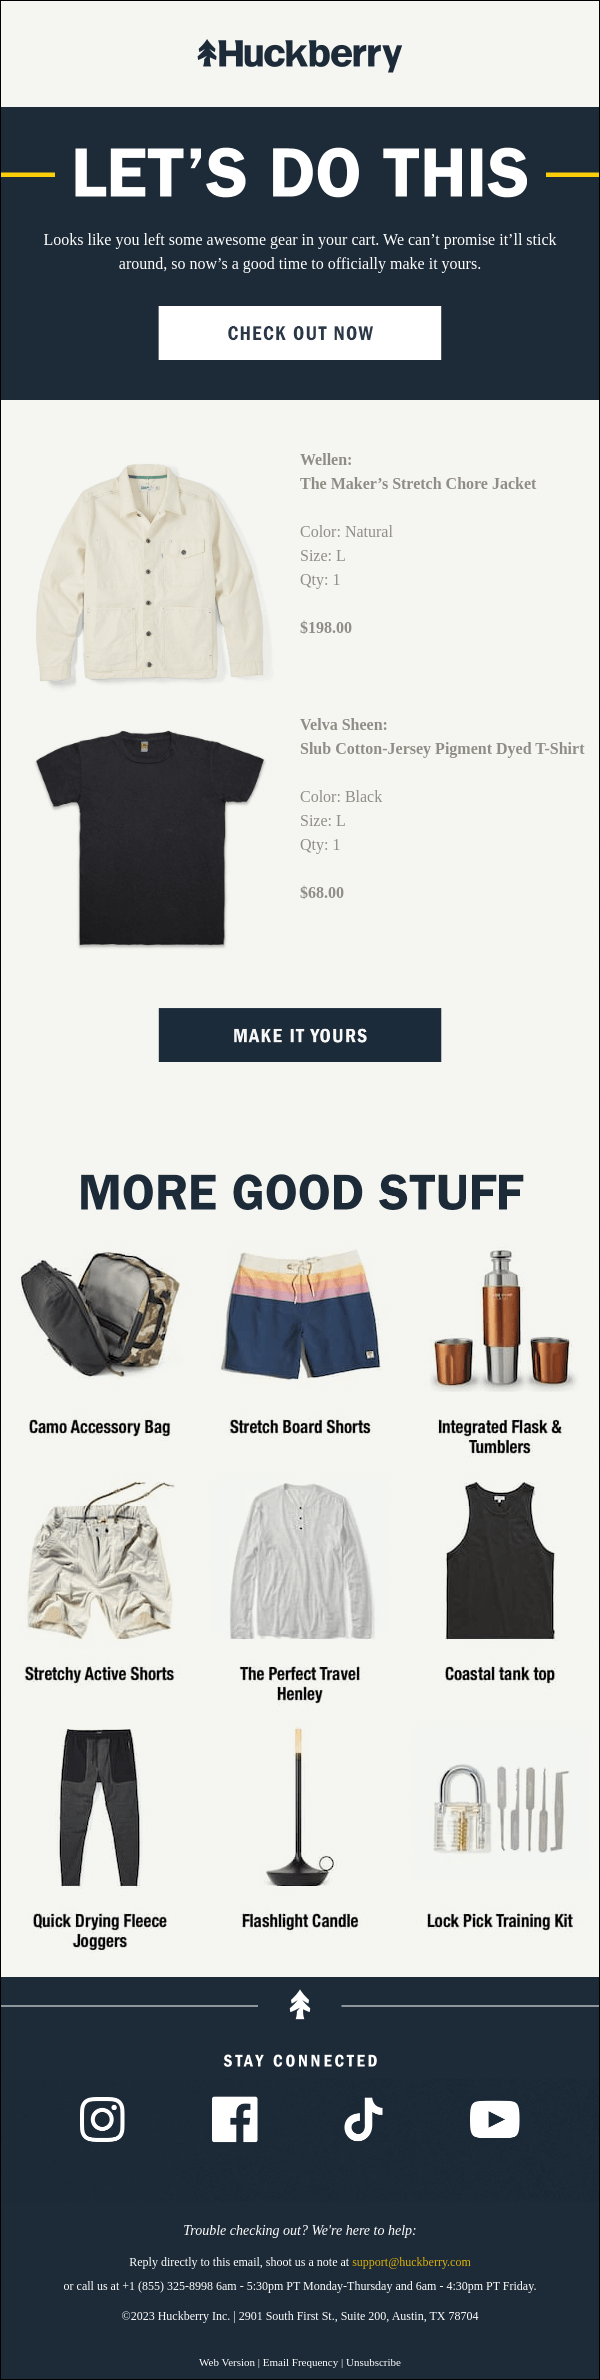 huckberry - email marketing template for fashion brands